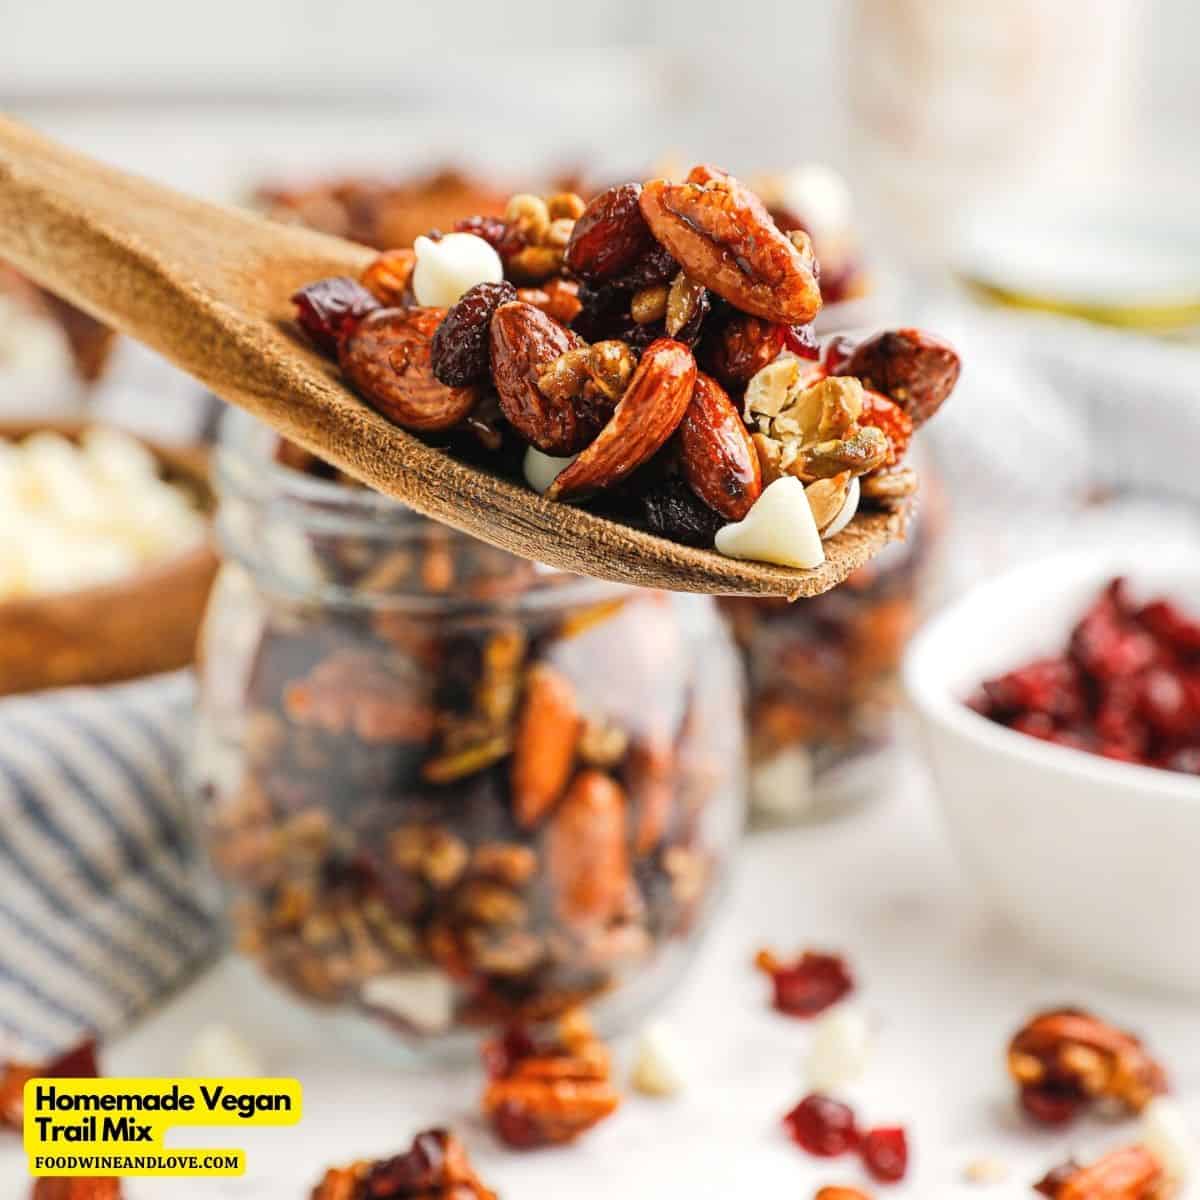 Homemade Vegan Trail Mix, a simple recipe for a delicious snack made with nuts, seeds, and sweetened with maple syrup.